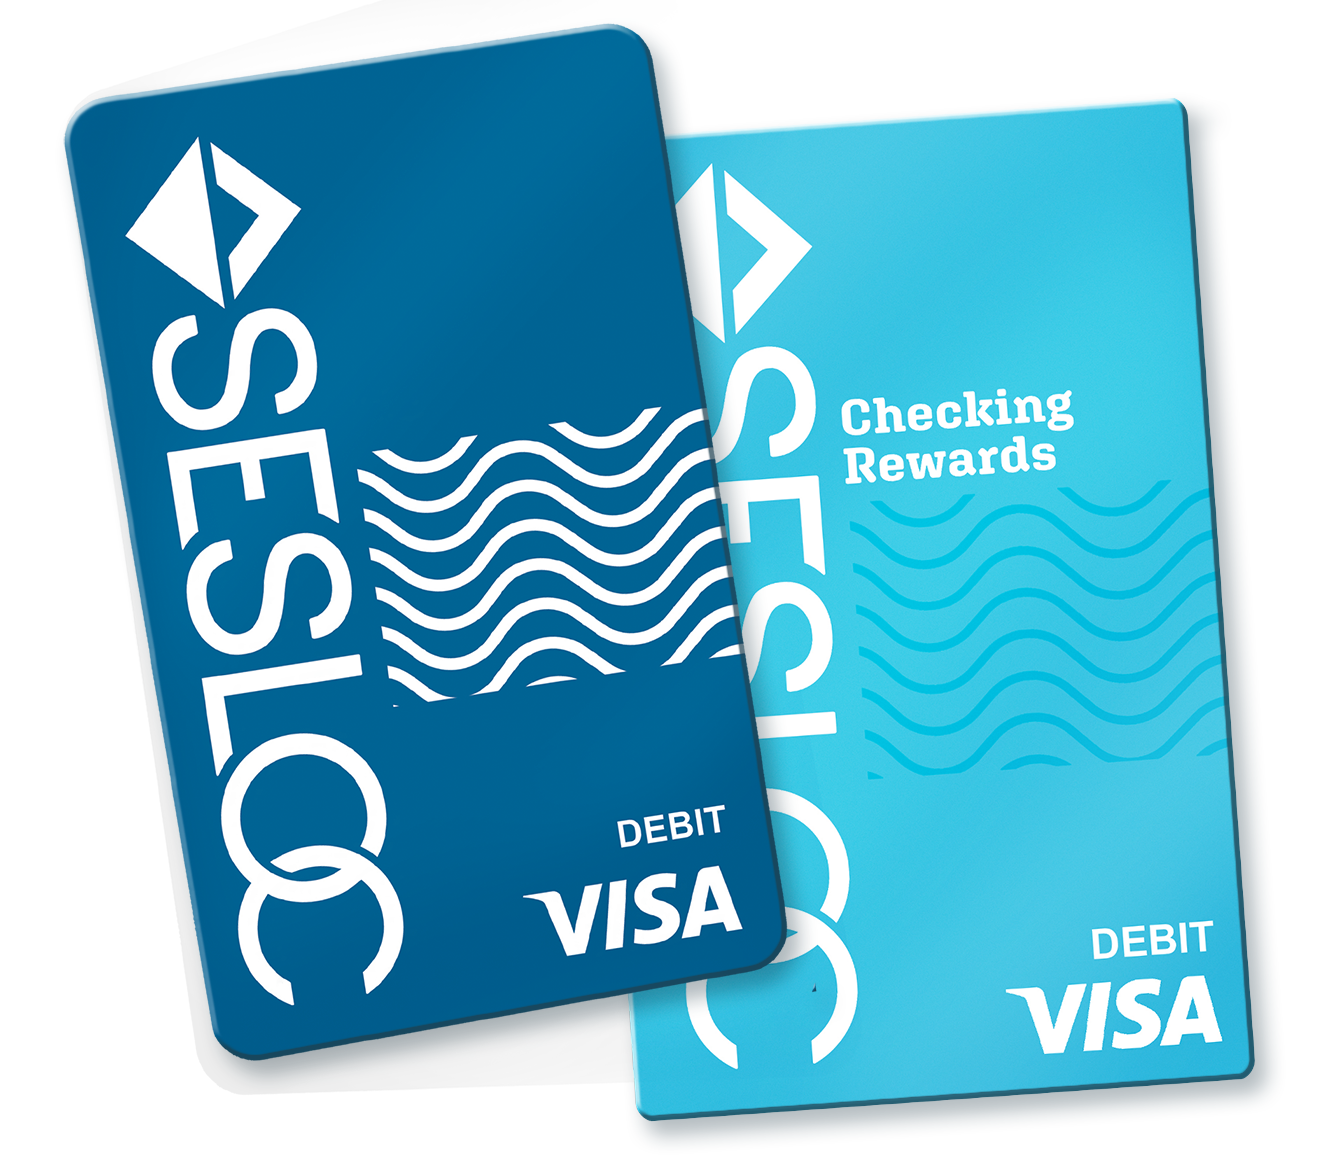 Debit cards for SESLOC Checking accounts.